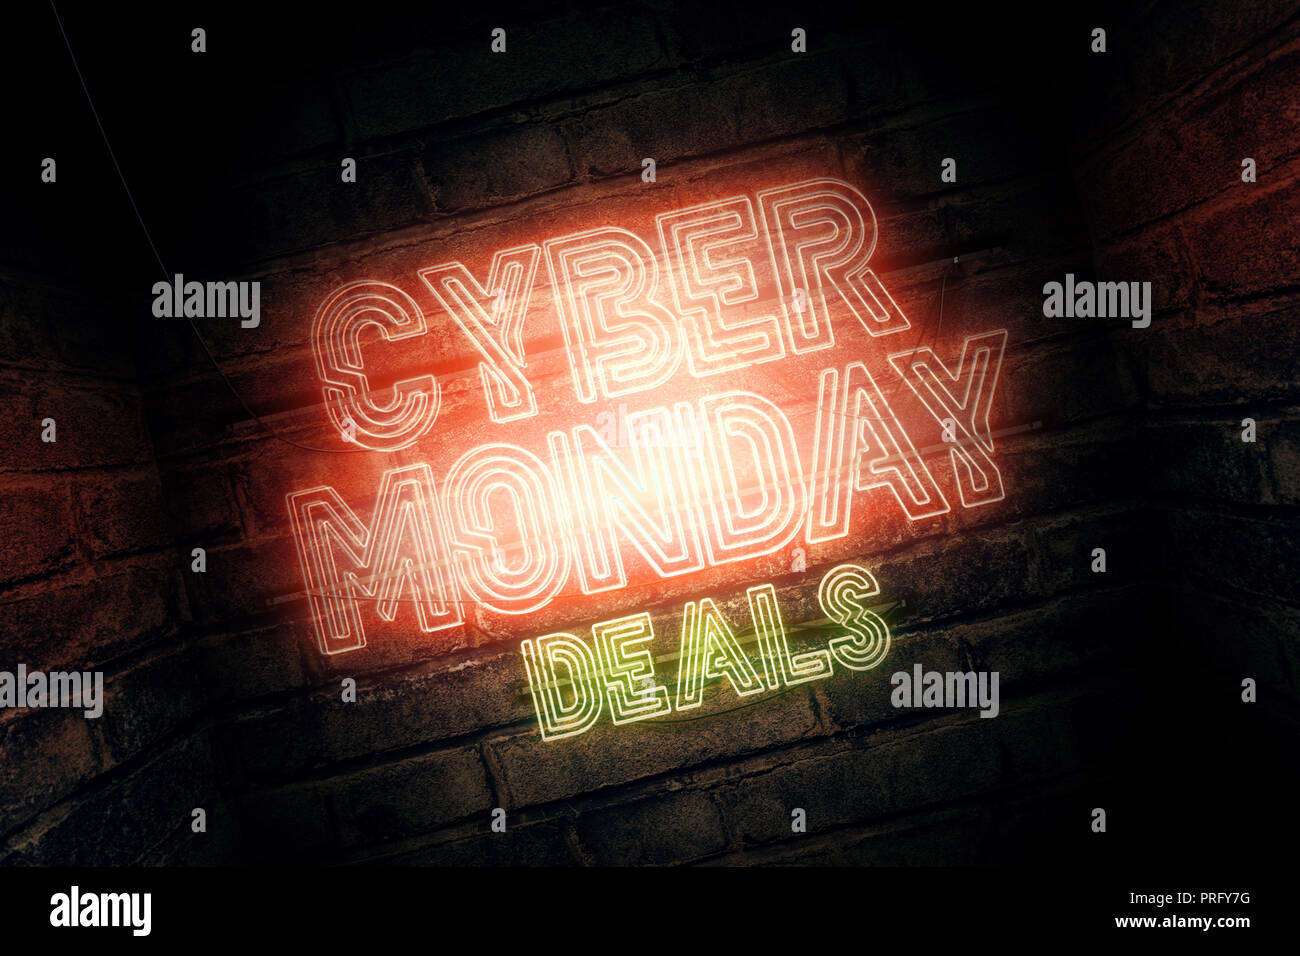 Cyber Monday Images – Browse 65,385 Stock Photos, Vectors, and